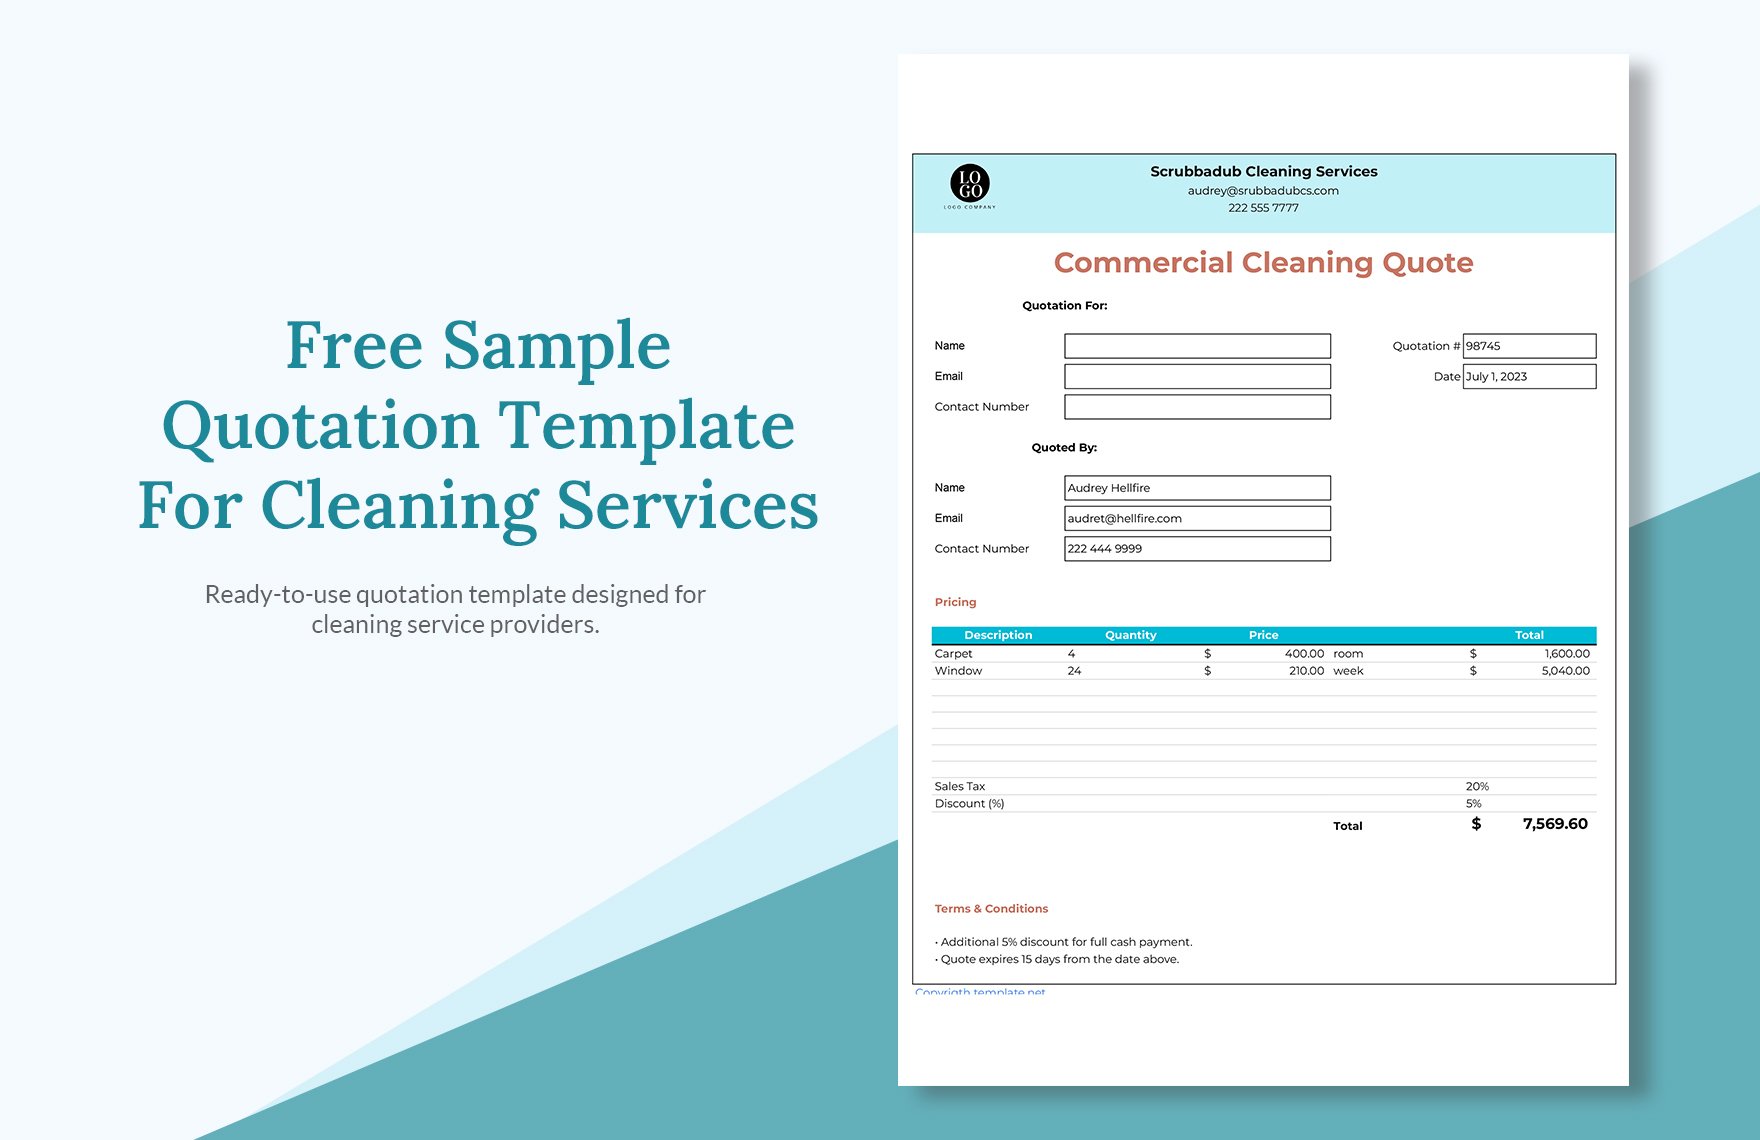 Sample Quotation Template For Cleaning Services